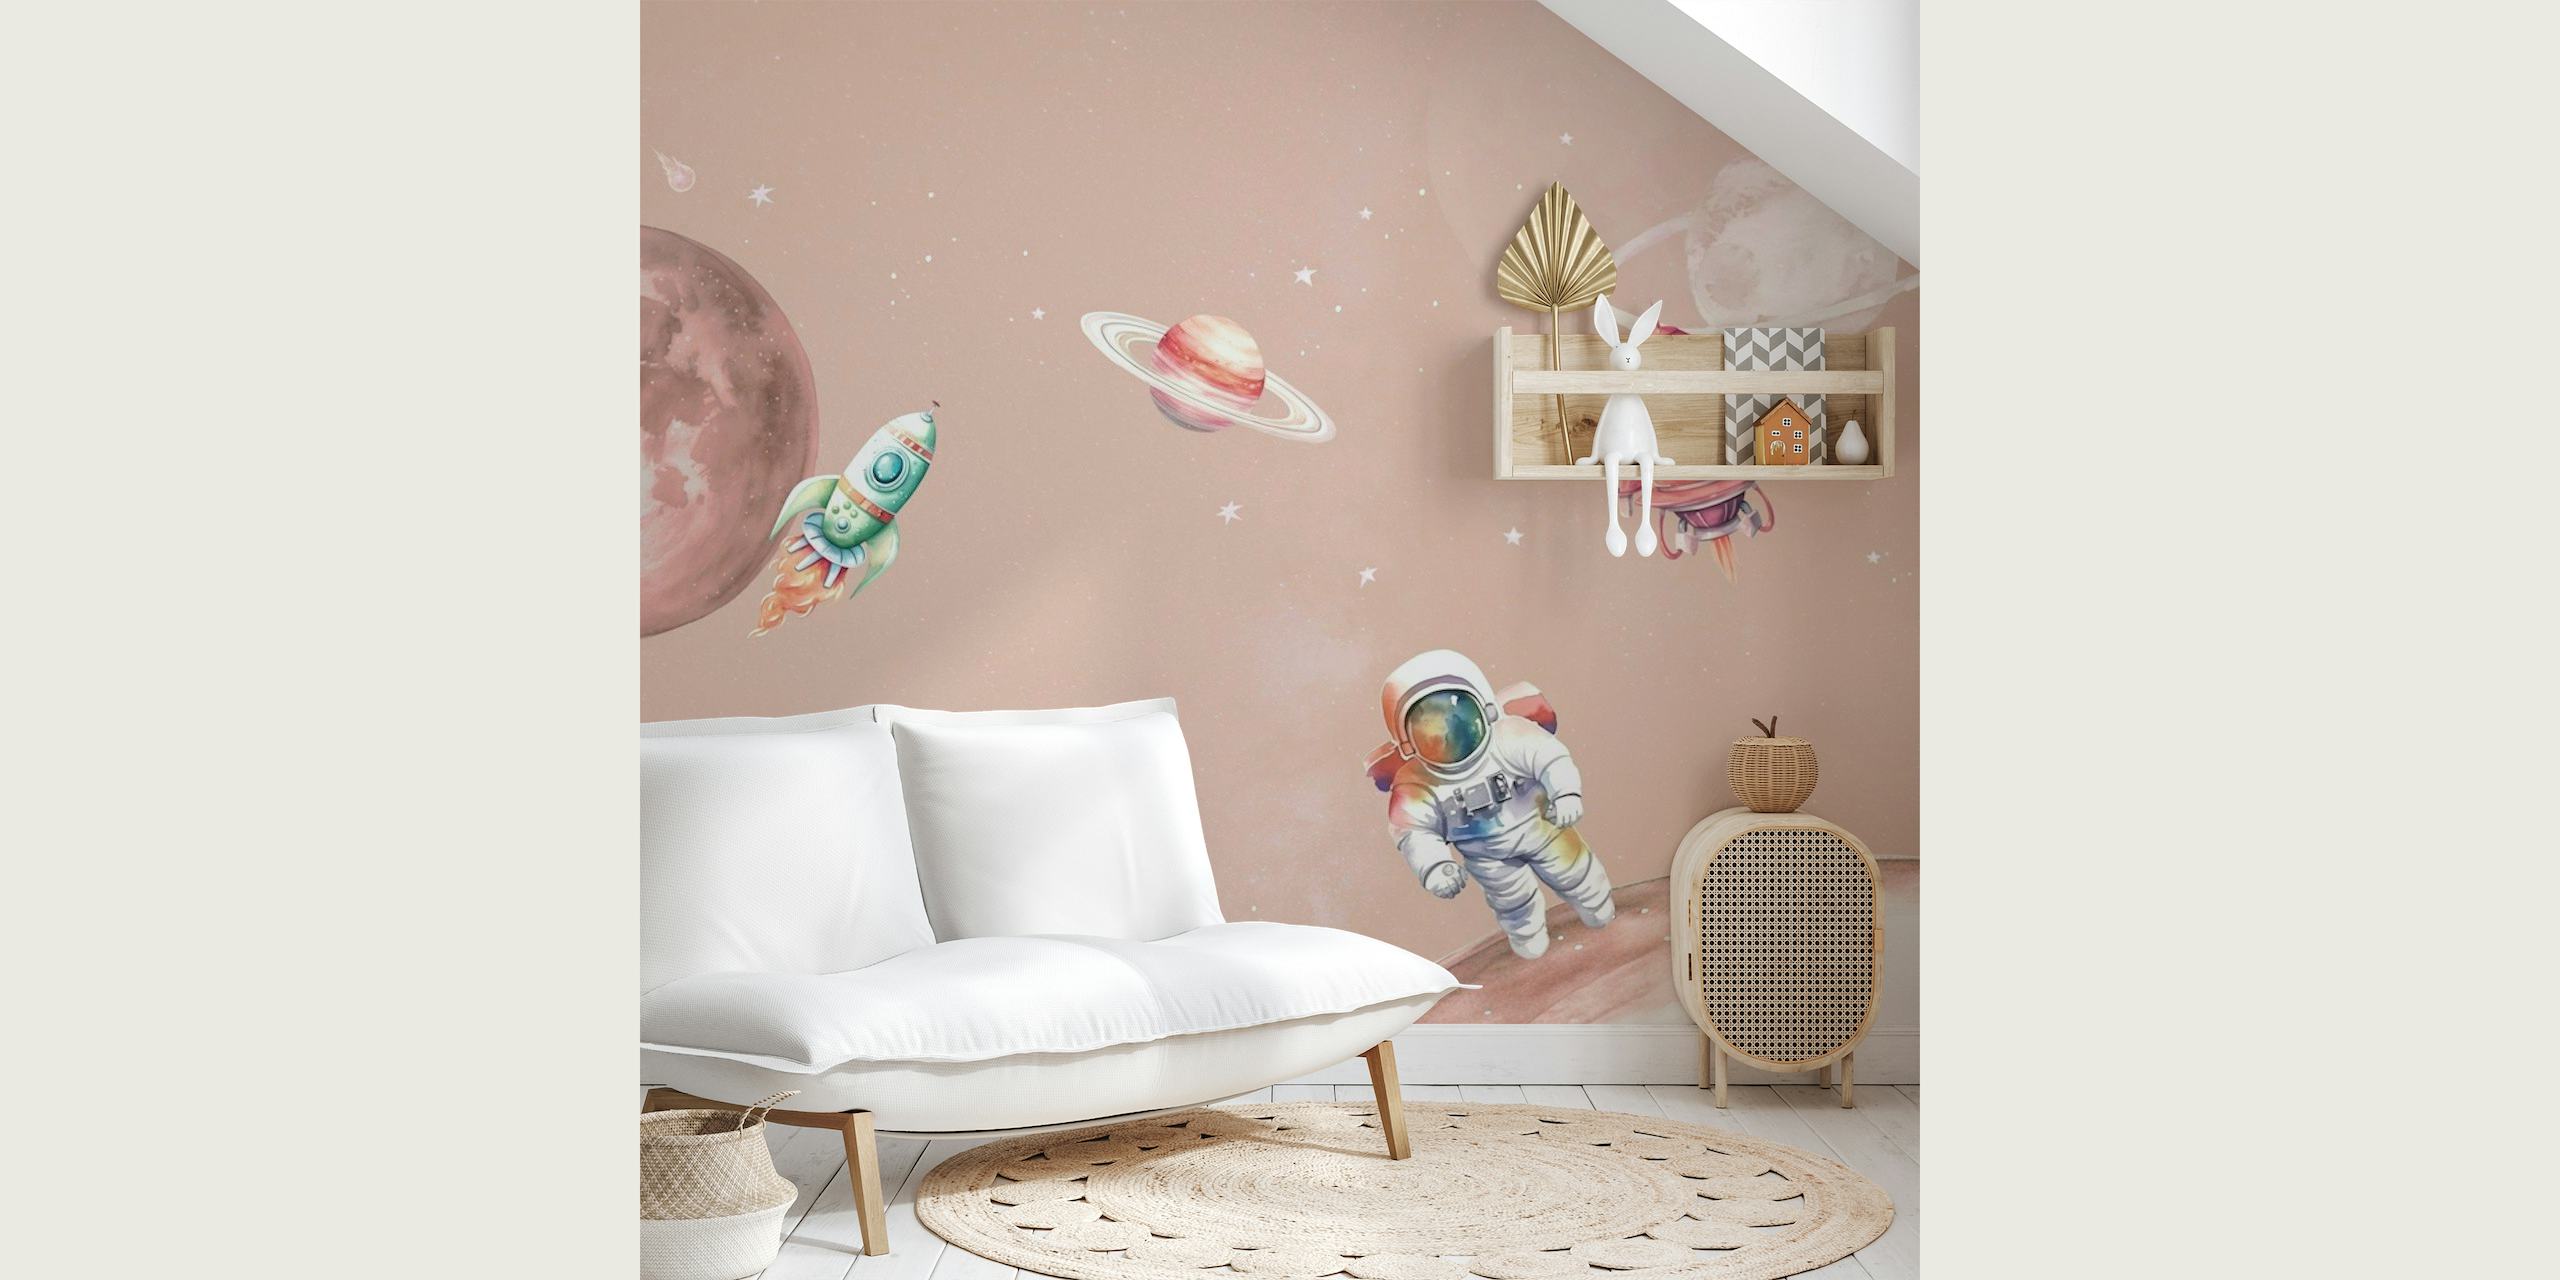 Cartoon-style space scene wall mural featuring an astronaut, planets, and spaceships on a blush pink background.